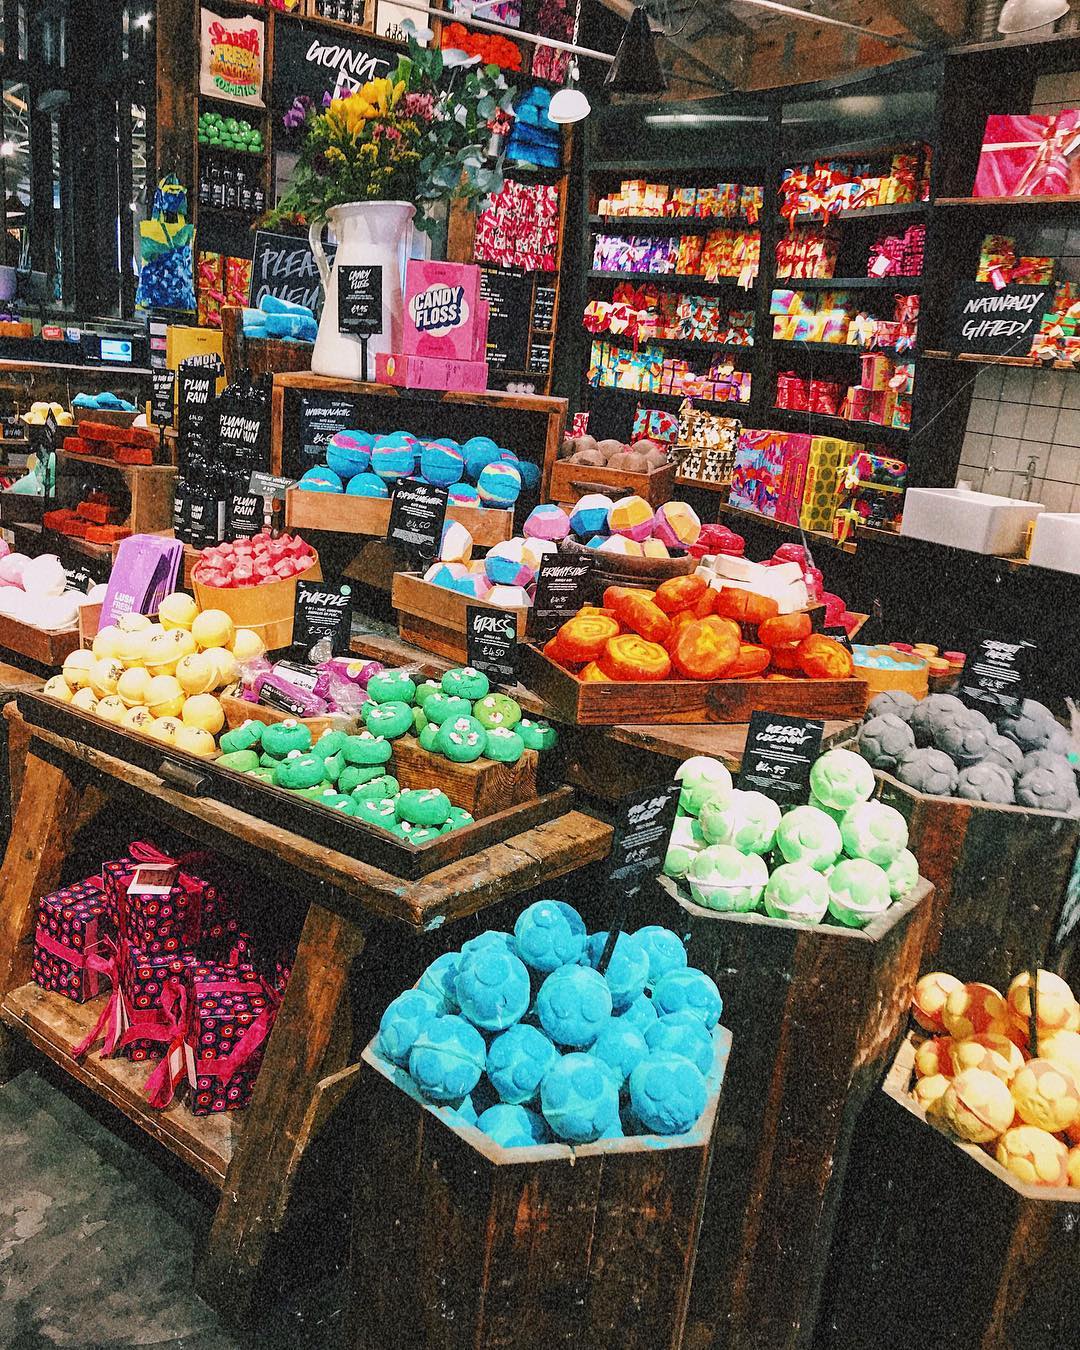 Lush products in London Oxford Street store